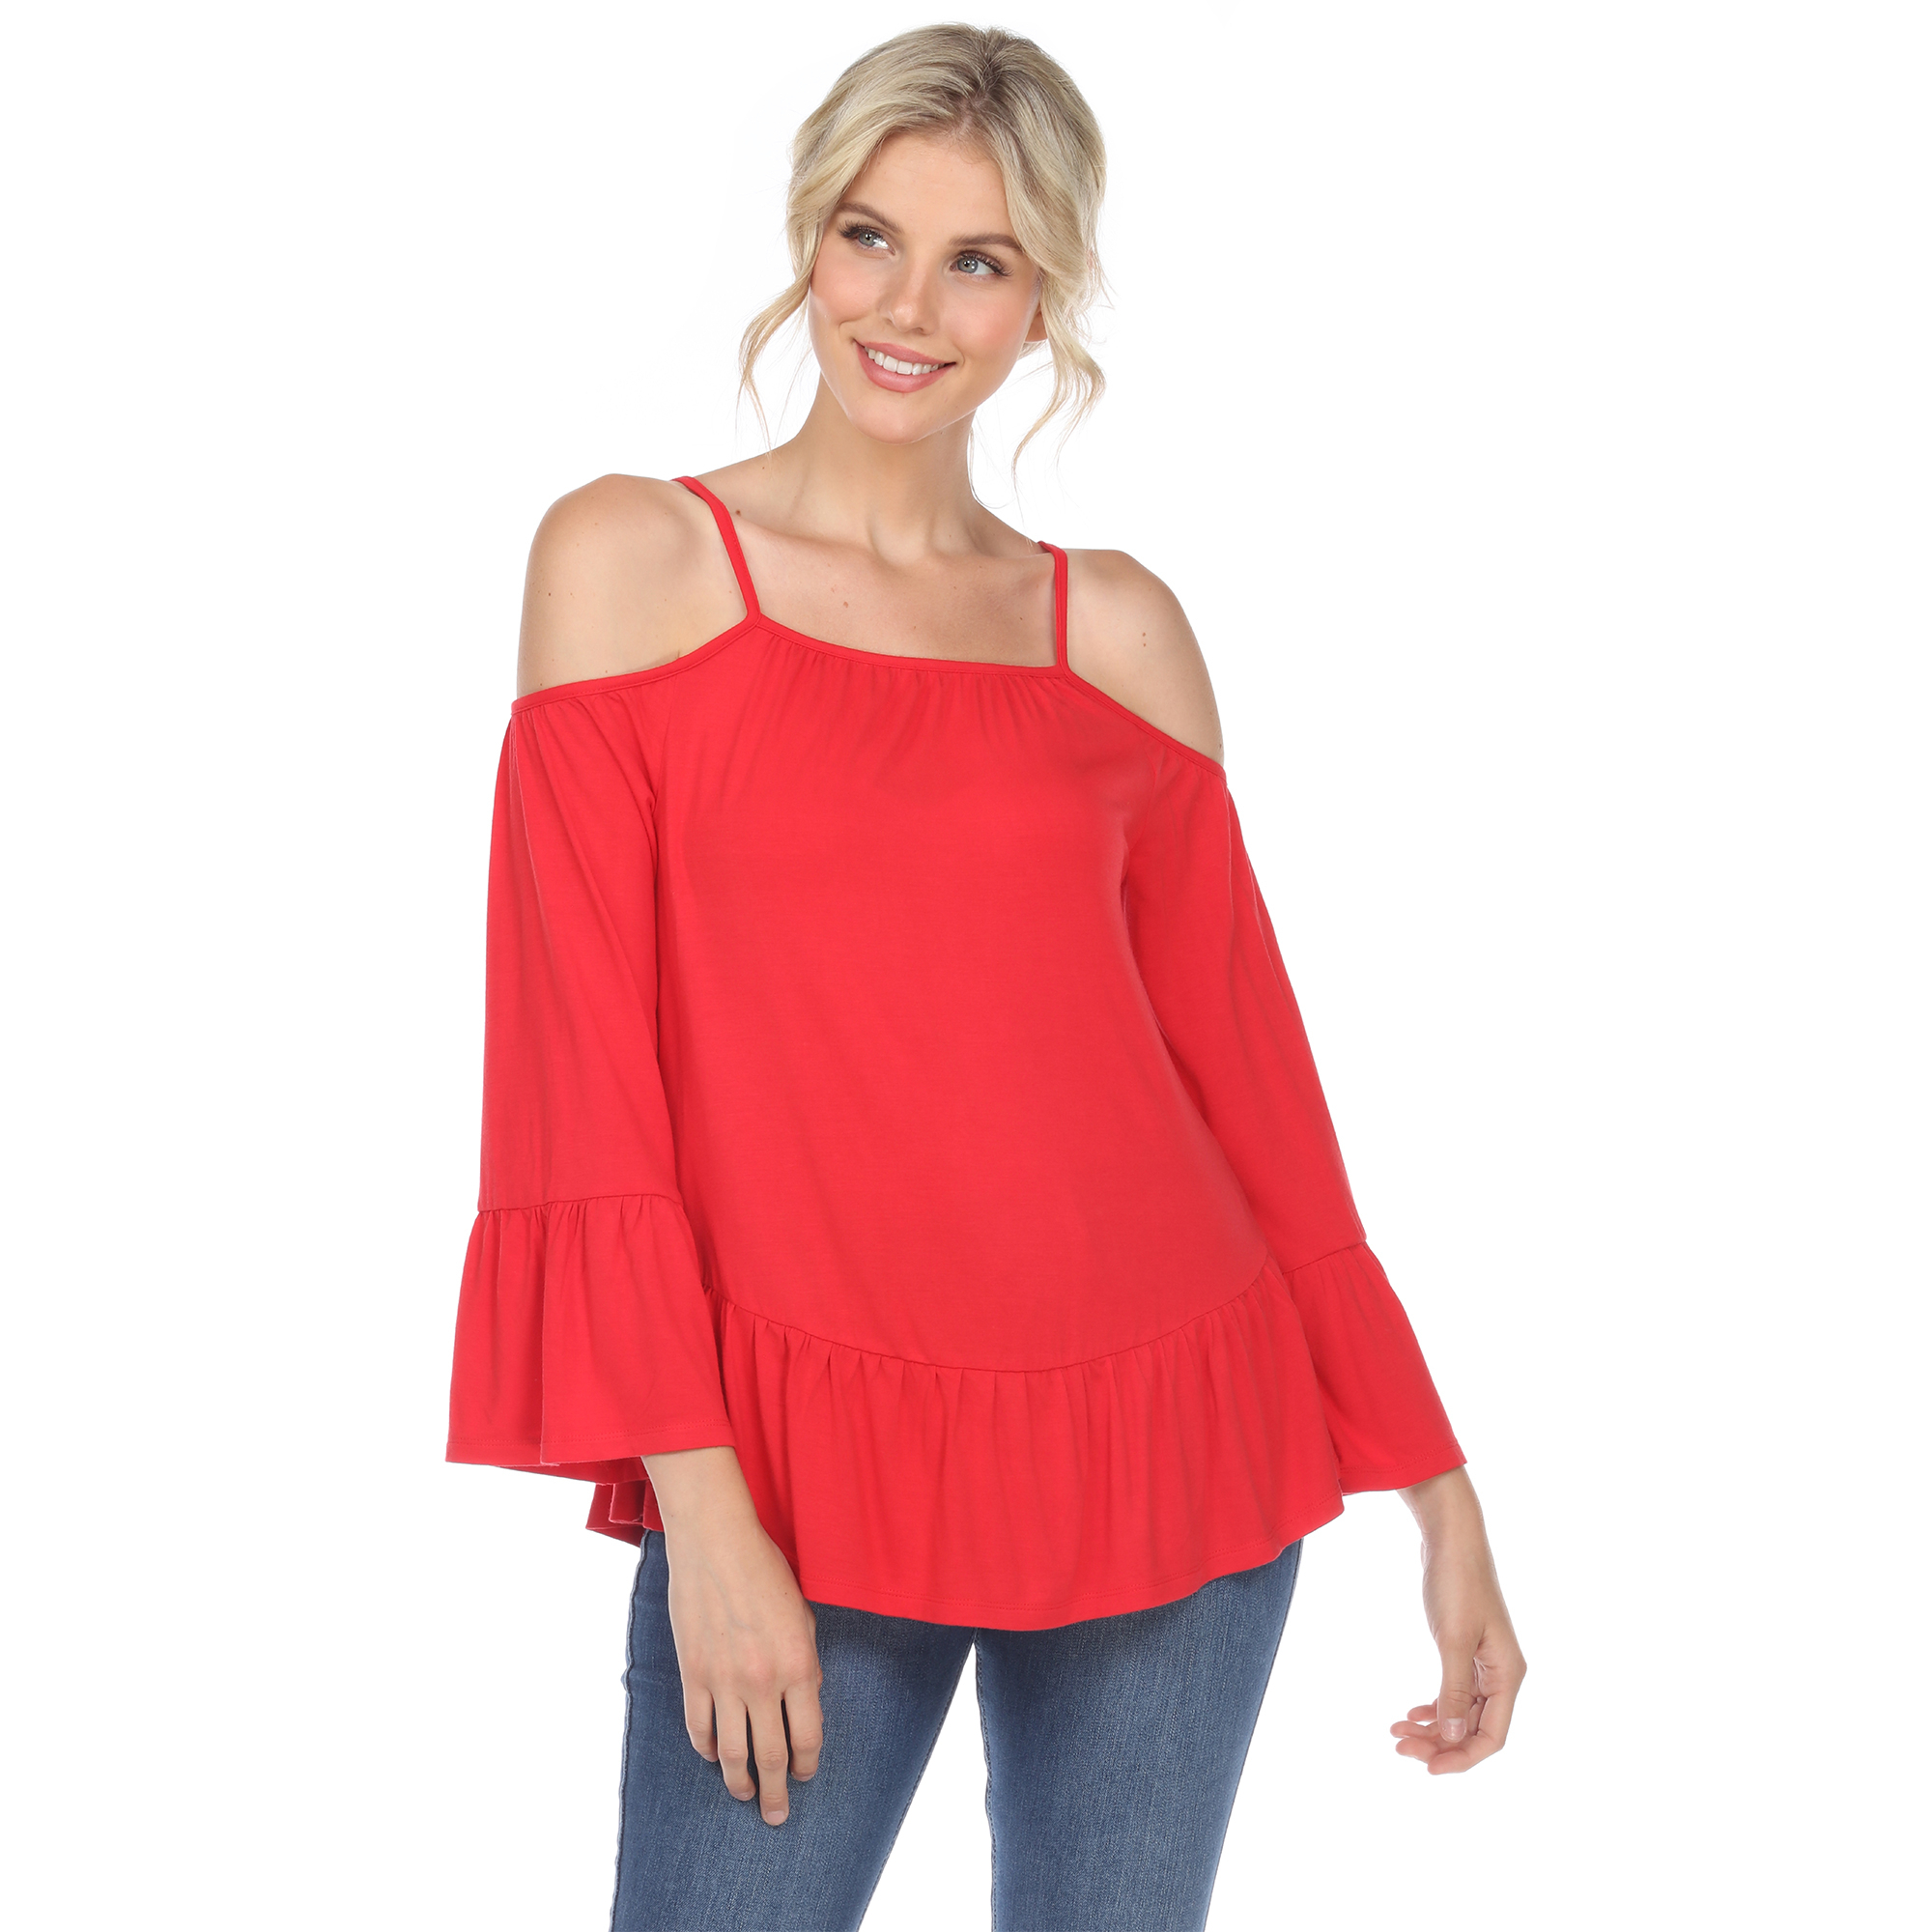 White Mark Women's Cold Shoulder Ruffle Sleeve Top - Red, Small